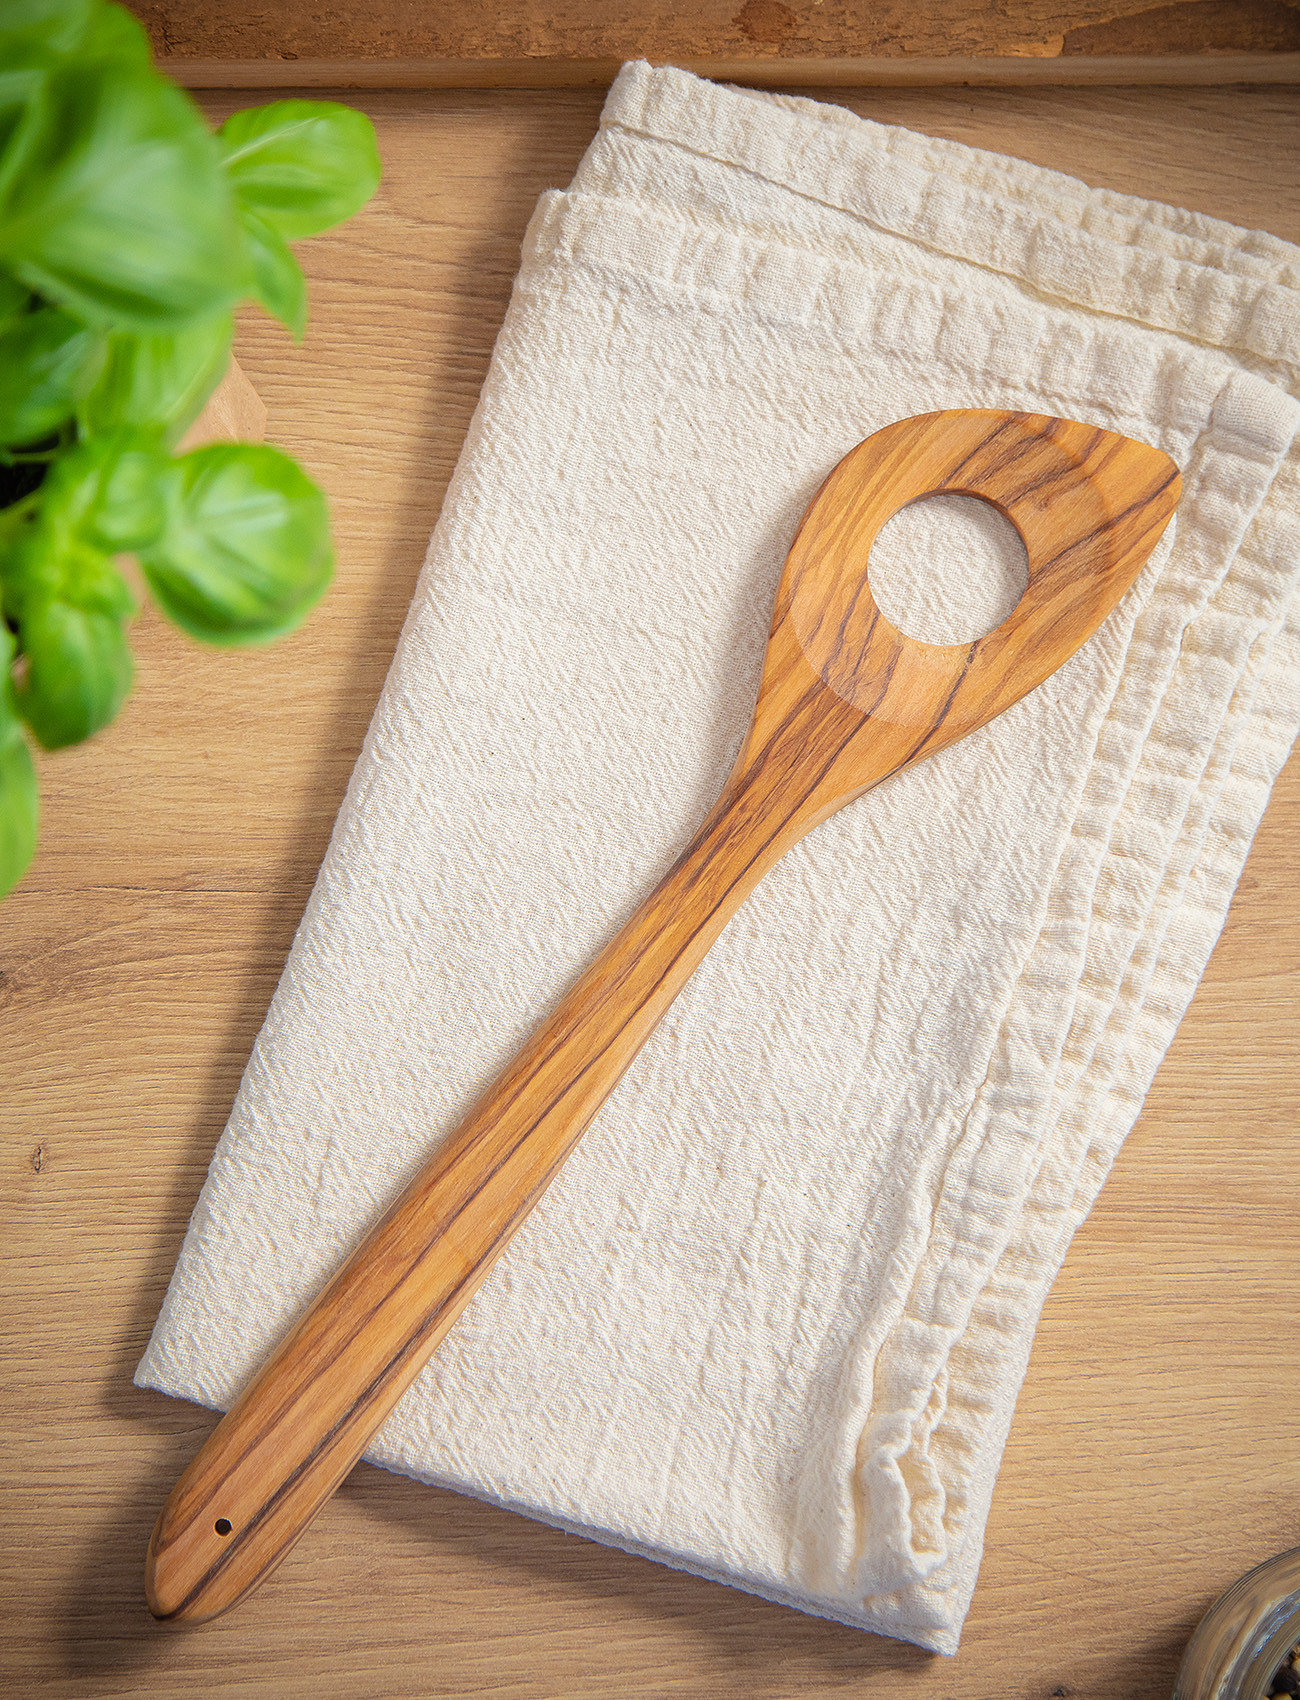 cilio - Cooking spoon with hole TOSCANA - die niedrigsten preise - olive wood - 1